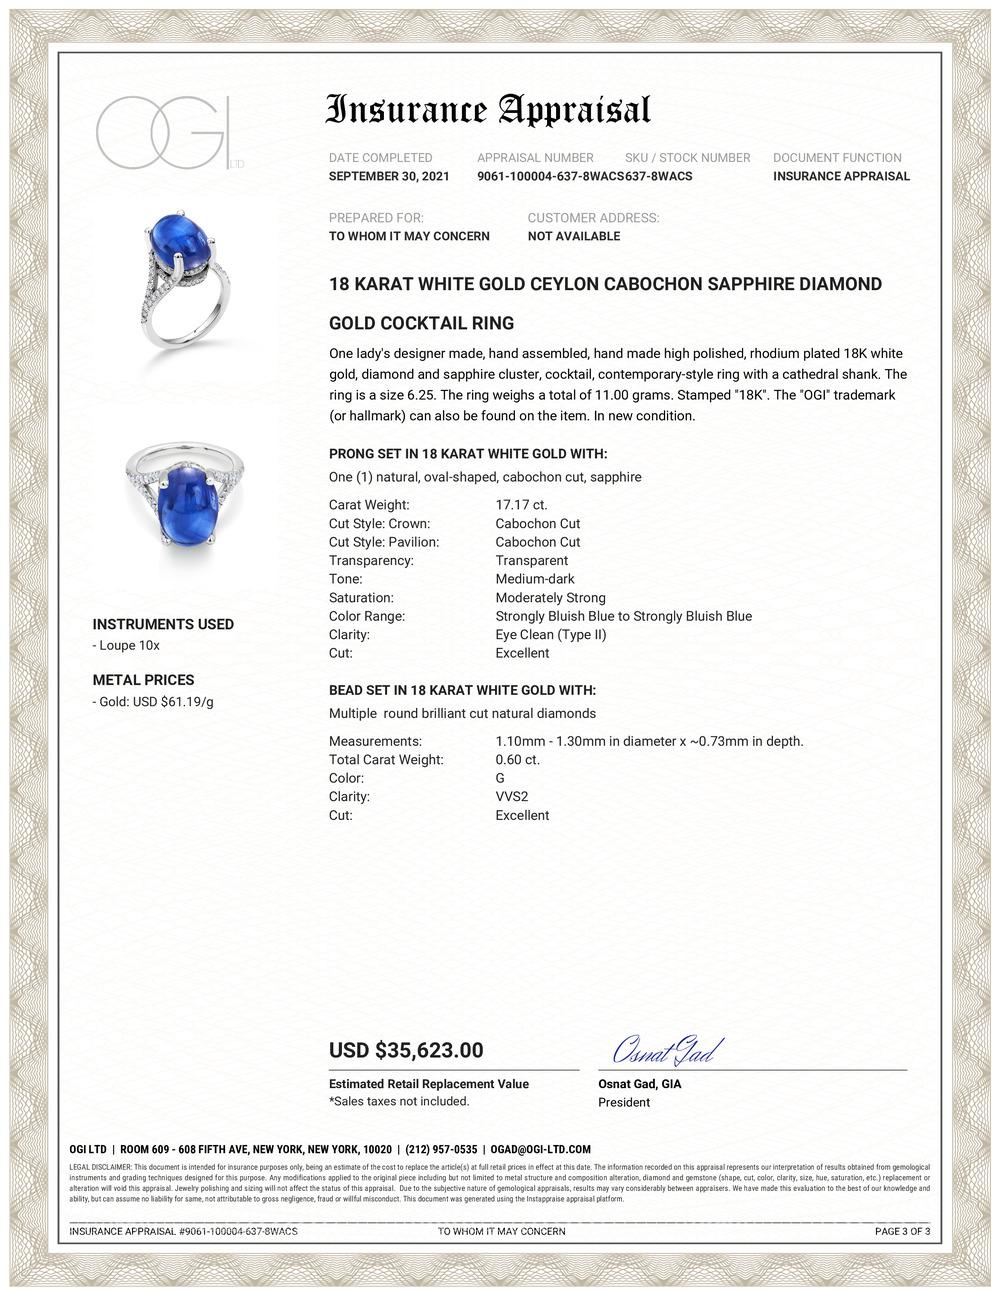 Contemporary Ceylon Cabochon Sapphire Diamond Gold Cocktail Ring Weighing 17.77 Carats